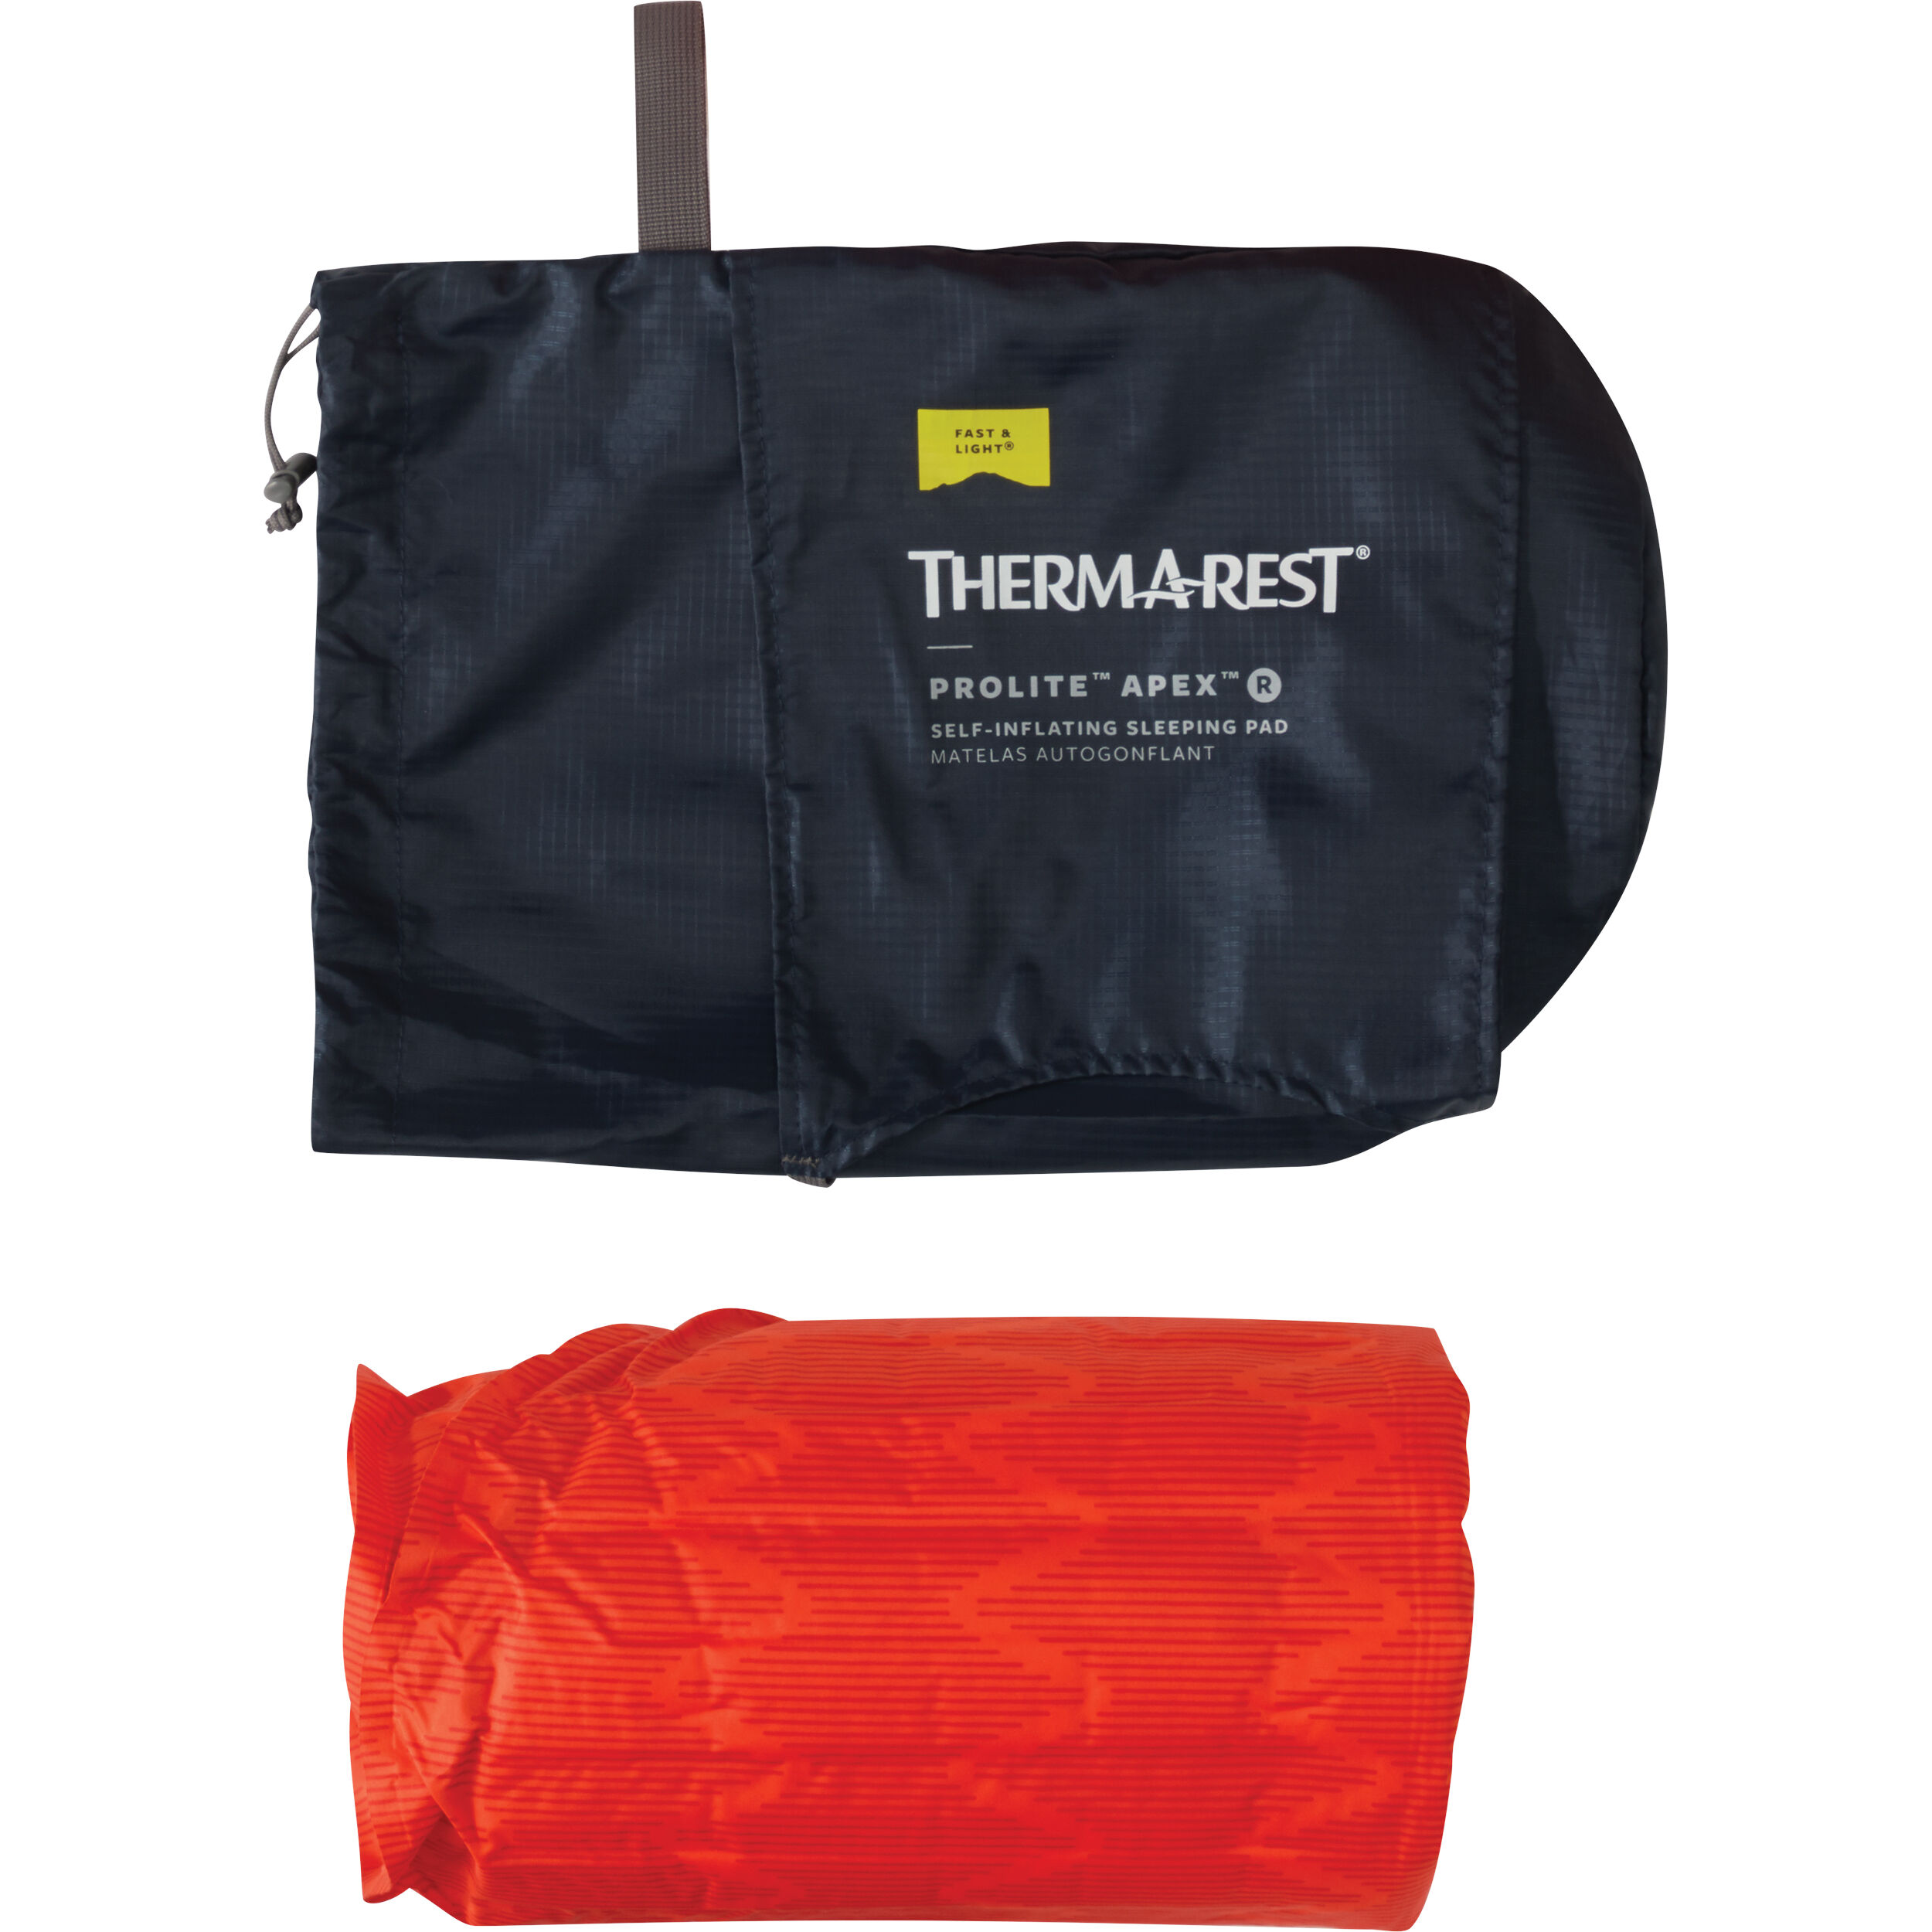 ProLite™ Apex™ Self Inflating Sleeping Pad | Therm-a-Rest®